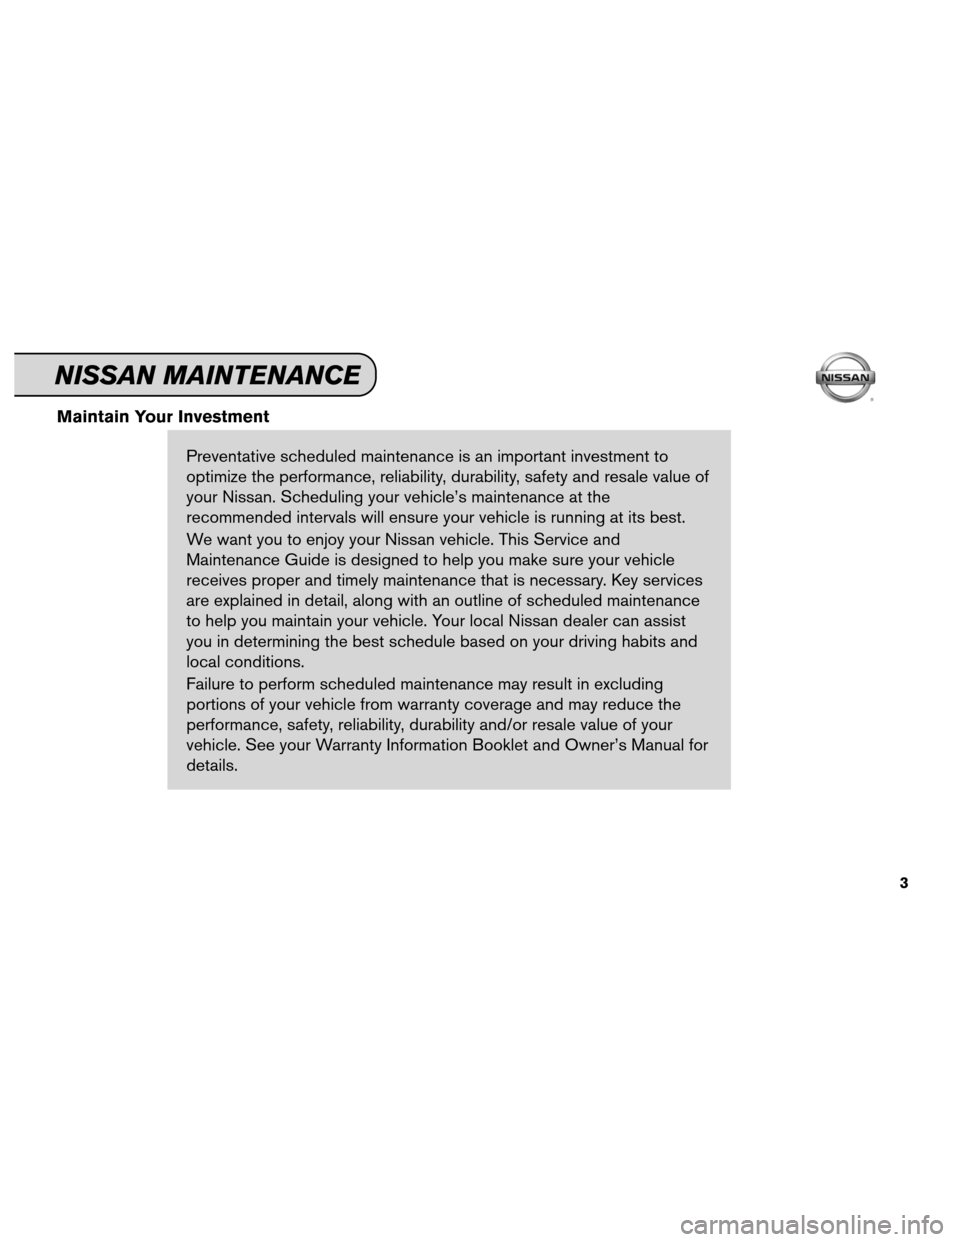 NISSAN XTERRA 2012 N50 / 2.G Service And Maintenance Guide Maintain Your InvestmentPreventative scheduled maintenance is an important investment to
optimize the performance, reliability, durability, safety and resale value of
your Nissan. Scheduling your vehi